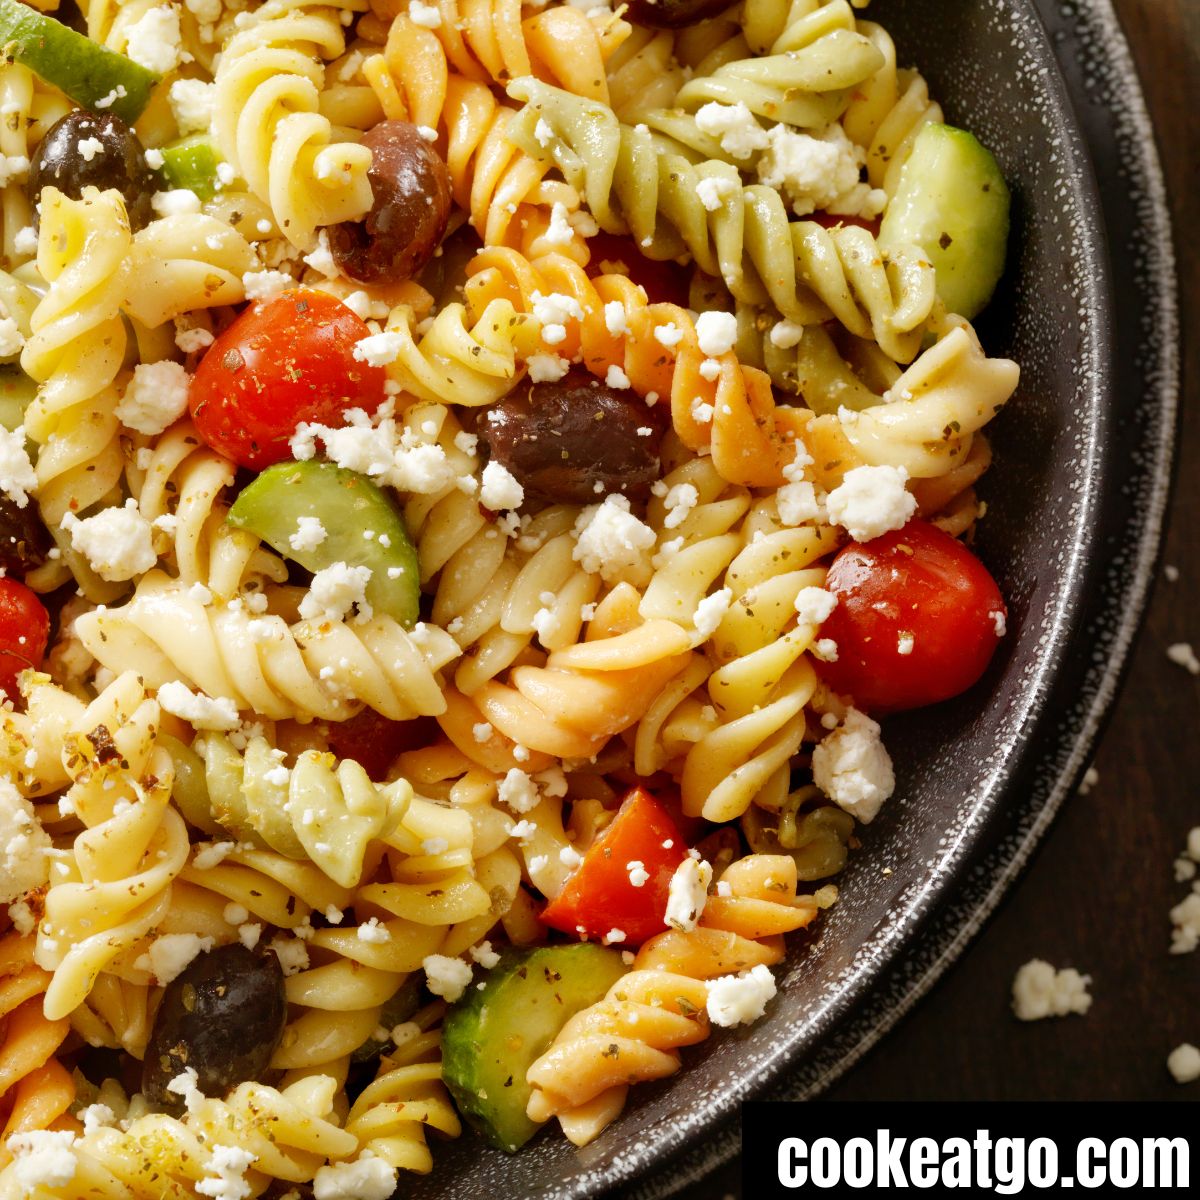 Pasta salad served in a dish